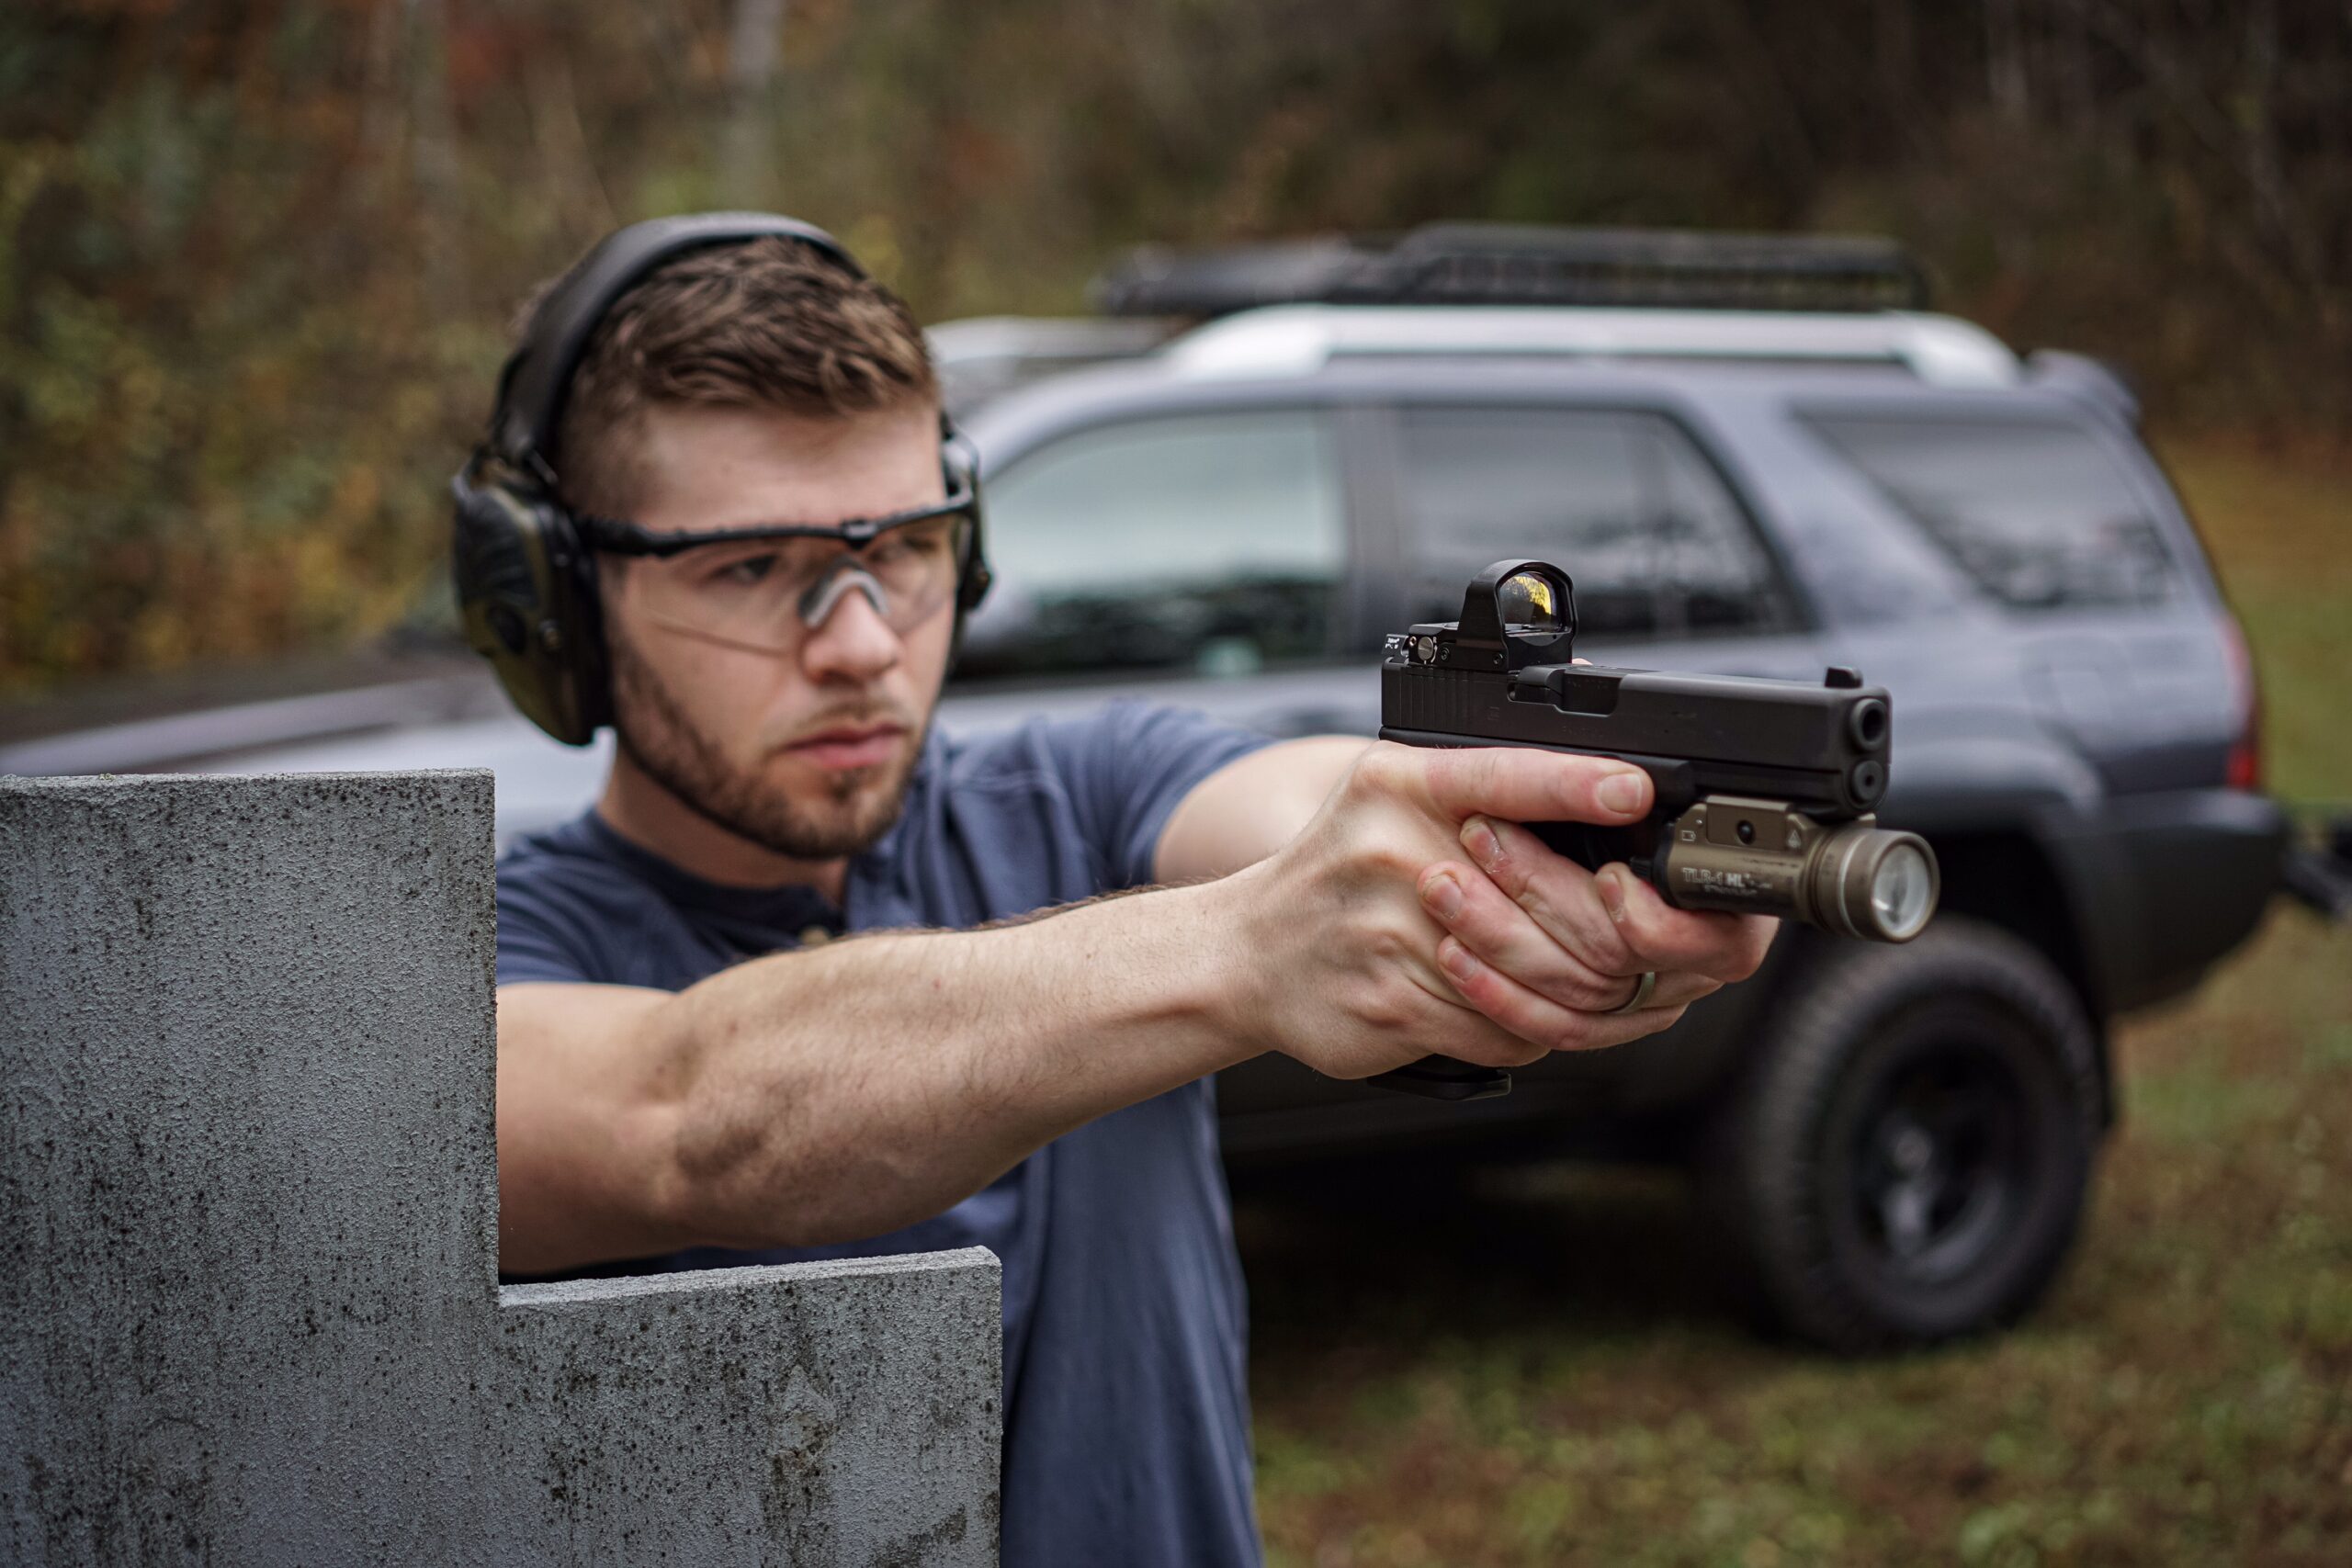 The author shooting a Gen 4 Glock 17 at a shooting range